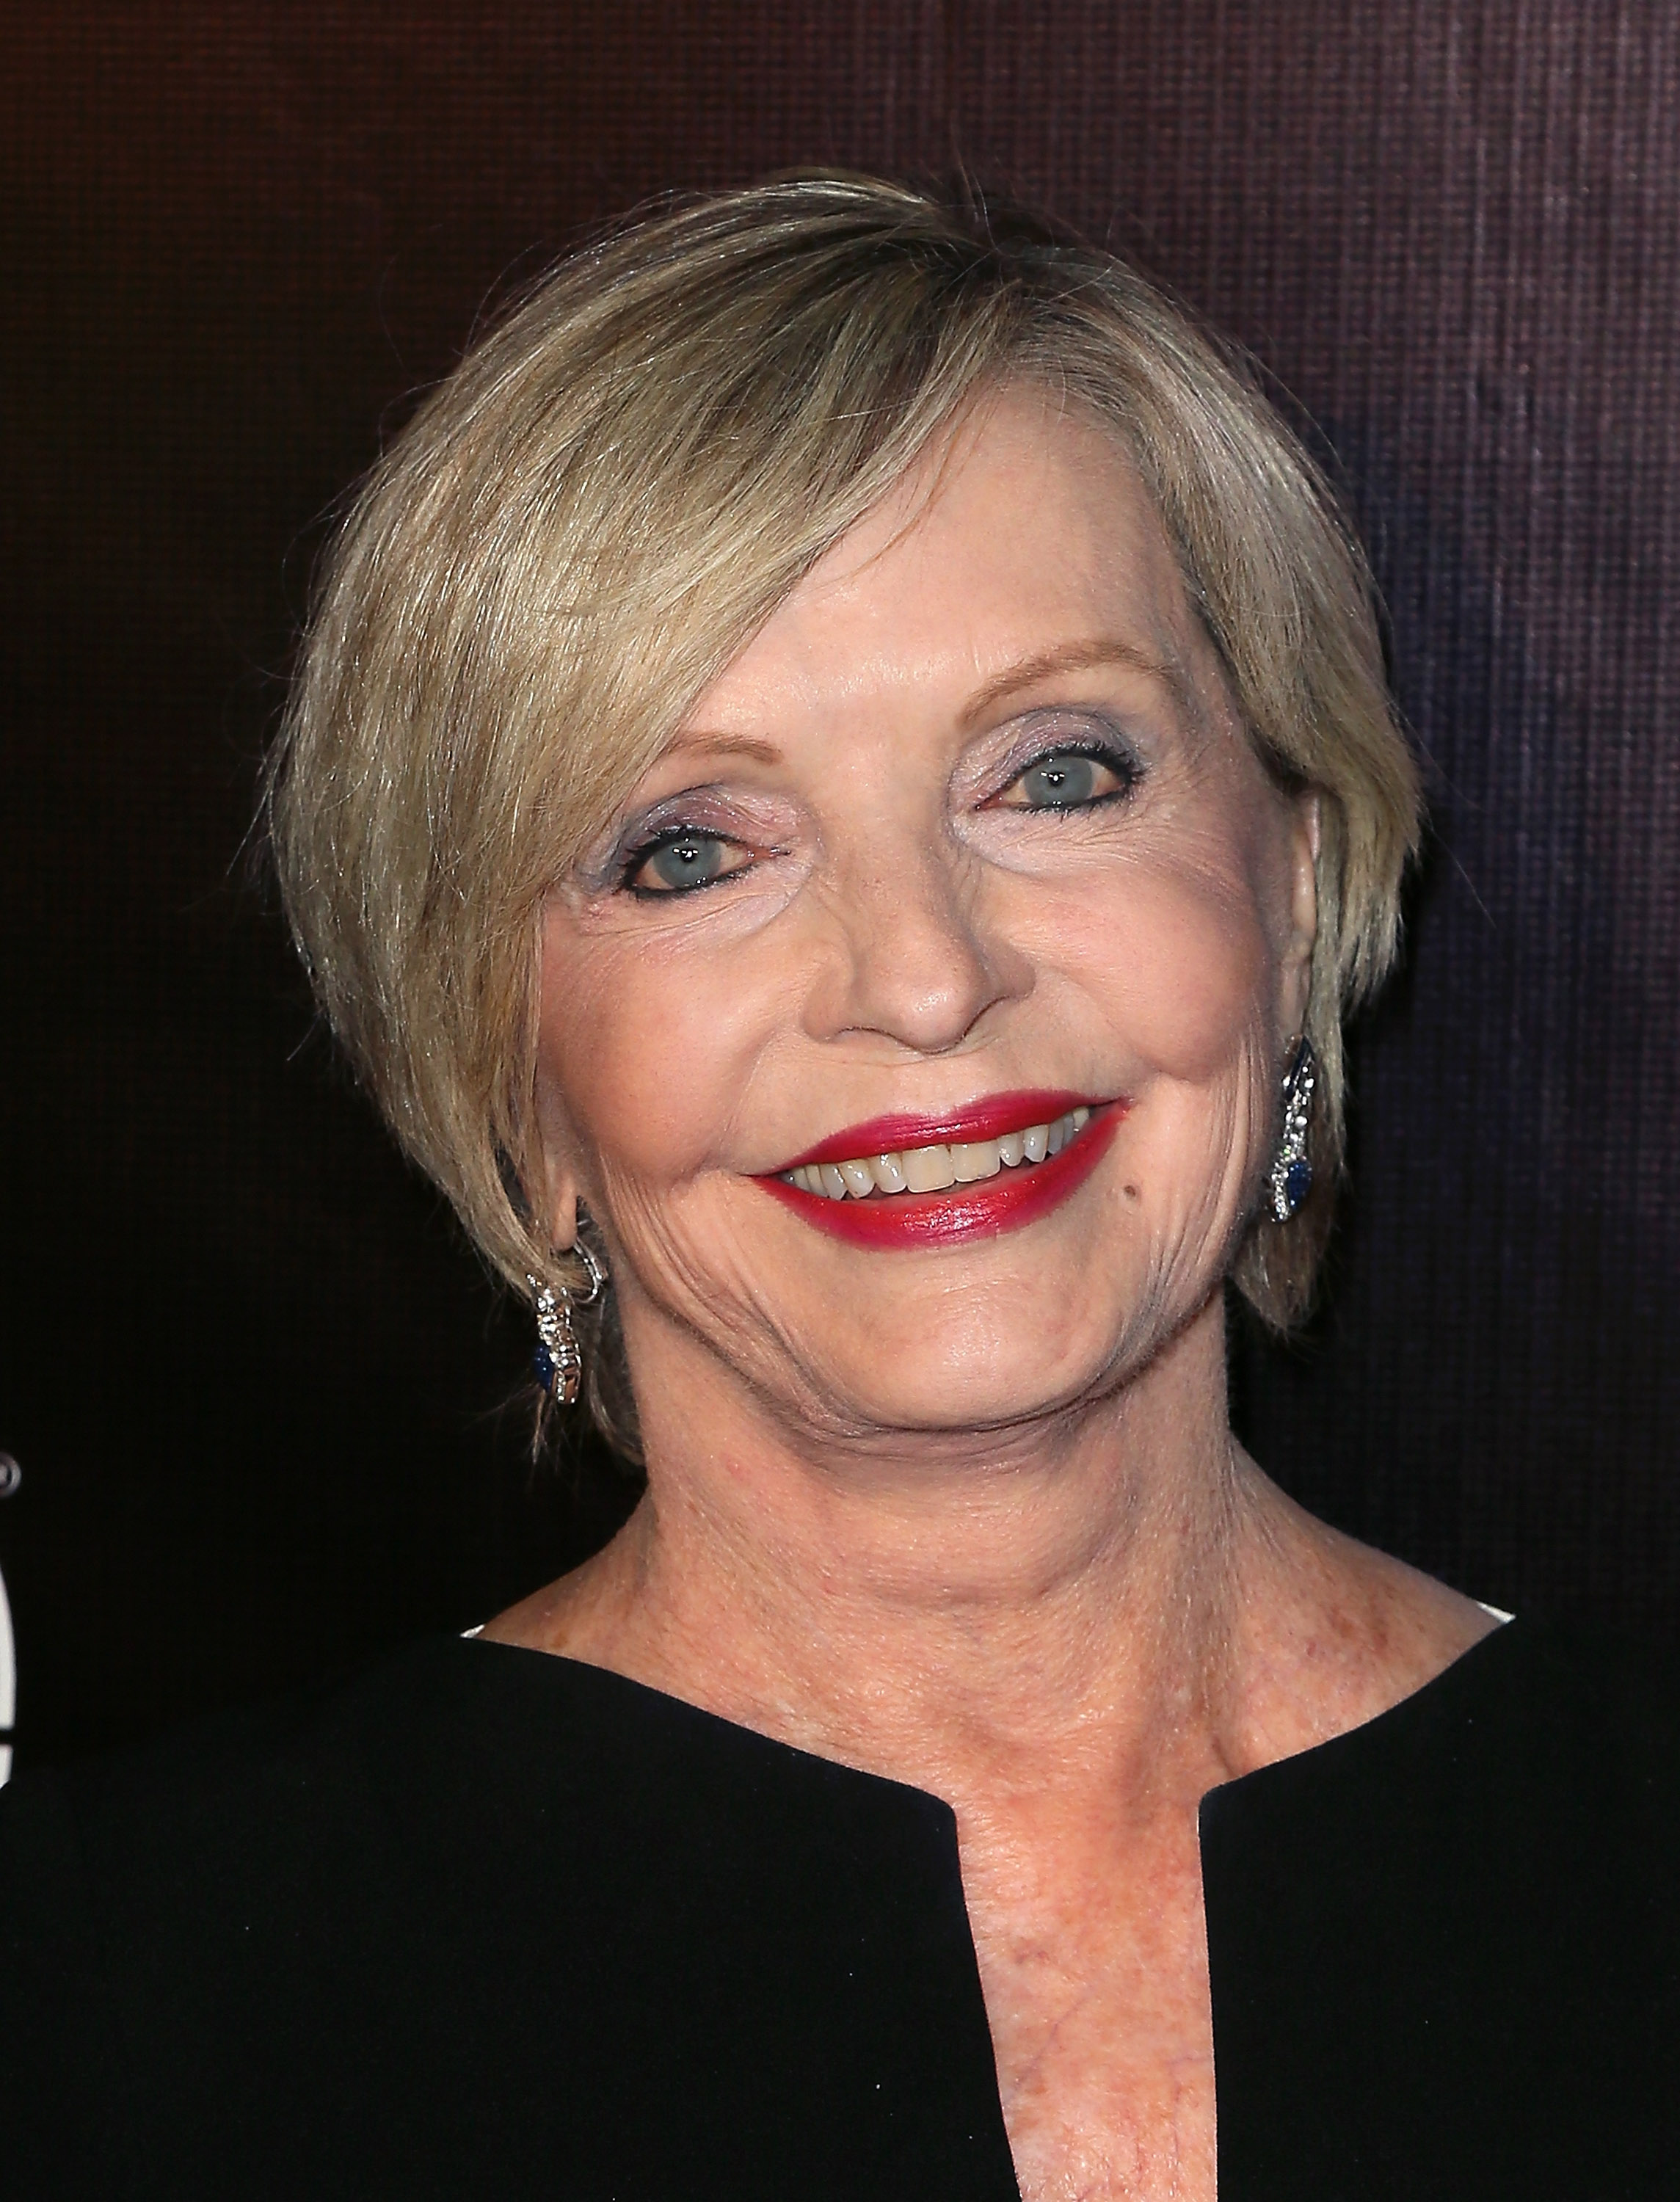 Actress Florence Henderson attends the 10th anniversary of ABC's "Dancing with the Stars" at Greystone Manor on April 21, 2015 in West Hollywood, Calif. (David Livingston—Getty Images)